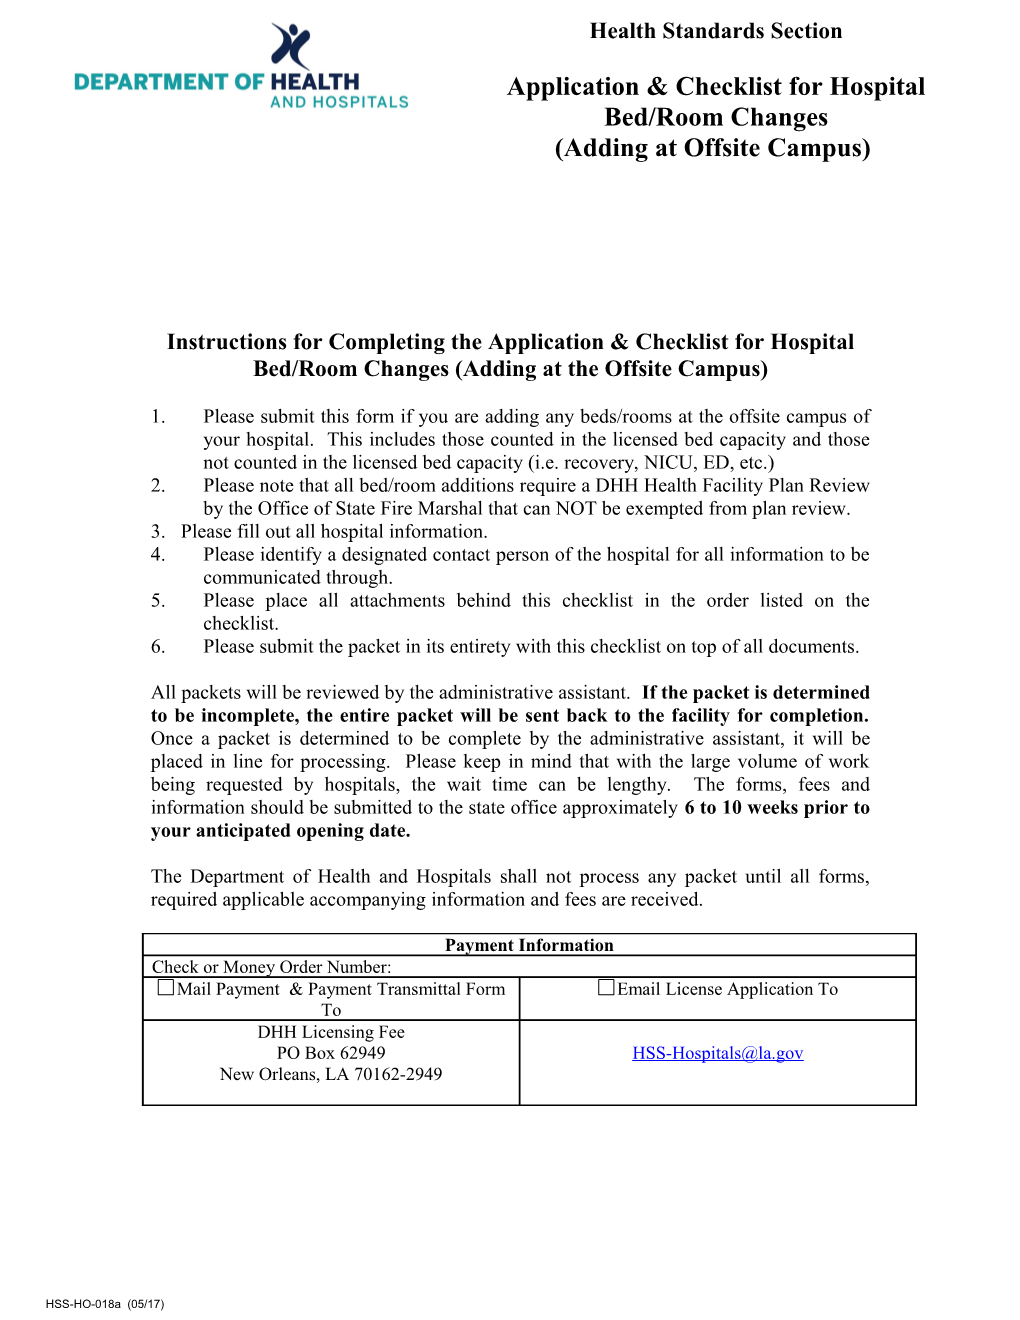 Instructions for Completing the Application & Checklist for Hospital Bed/Room Changes s1